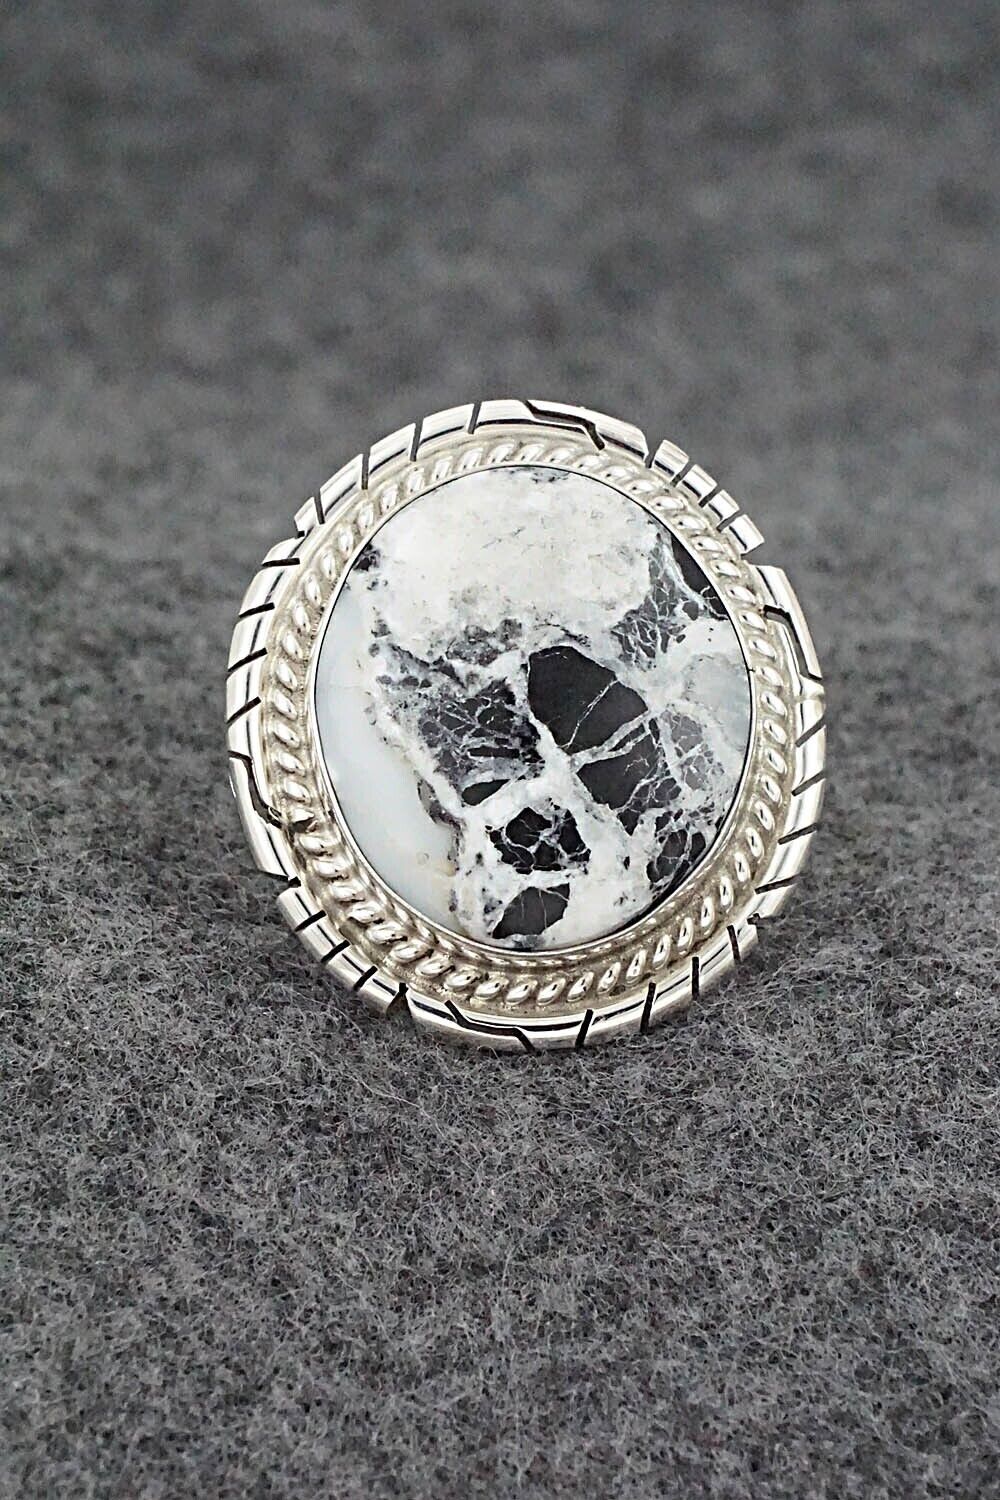 White Buffalo & Sterling Silver Ring - Peggy Skeets - Size 6.75